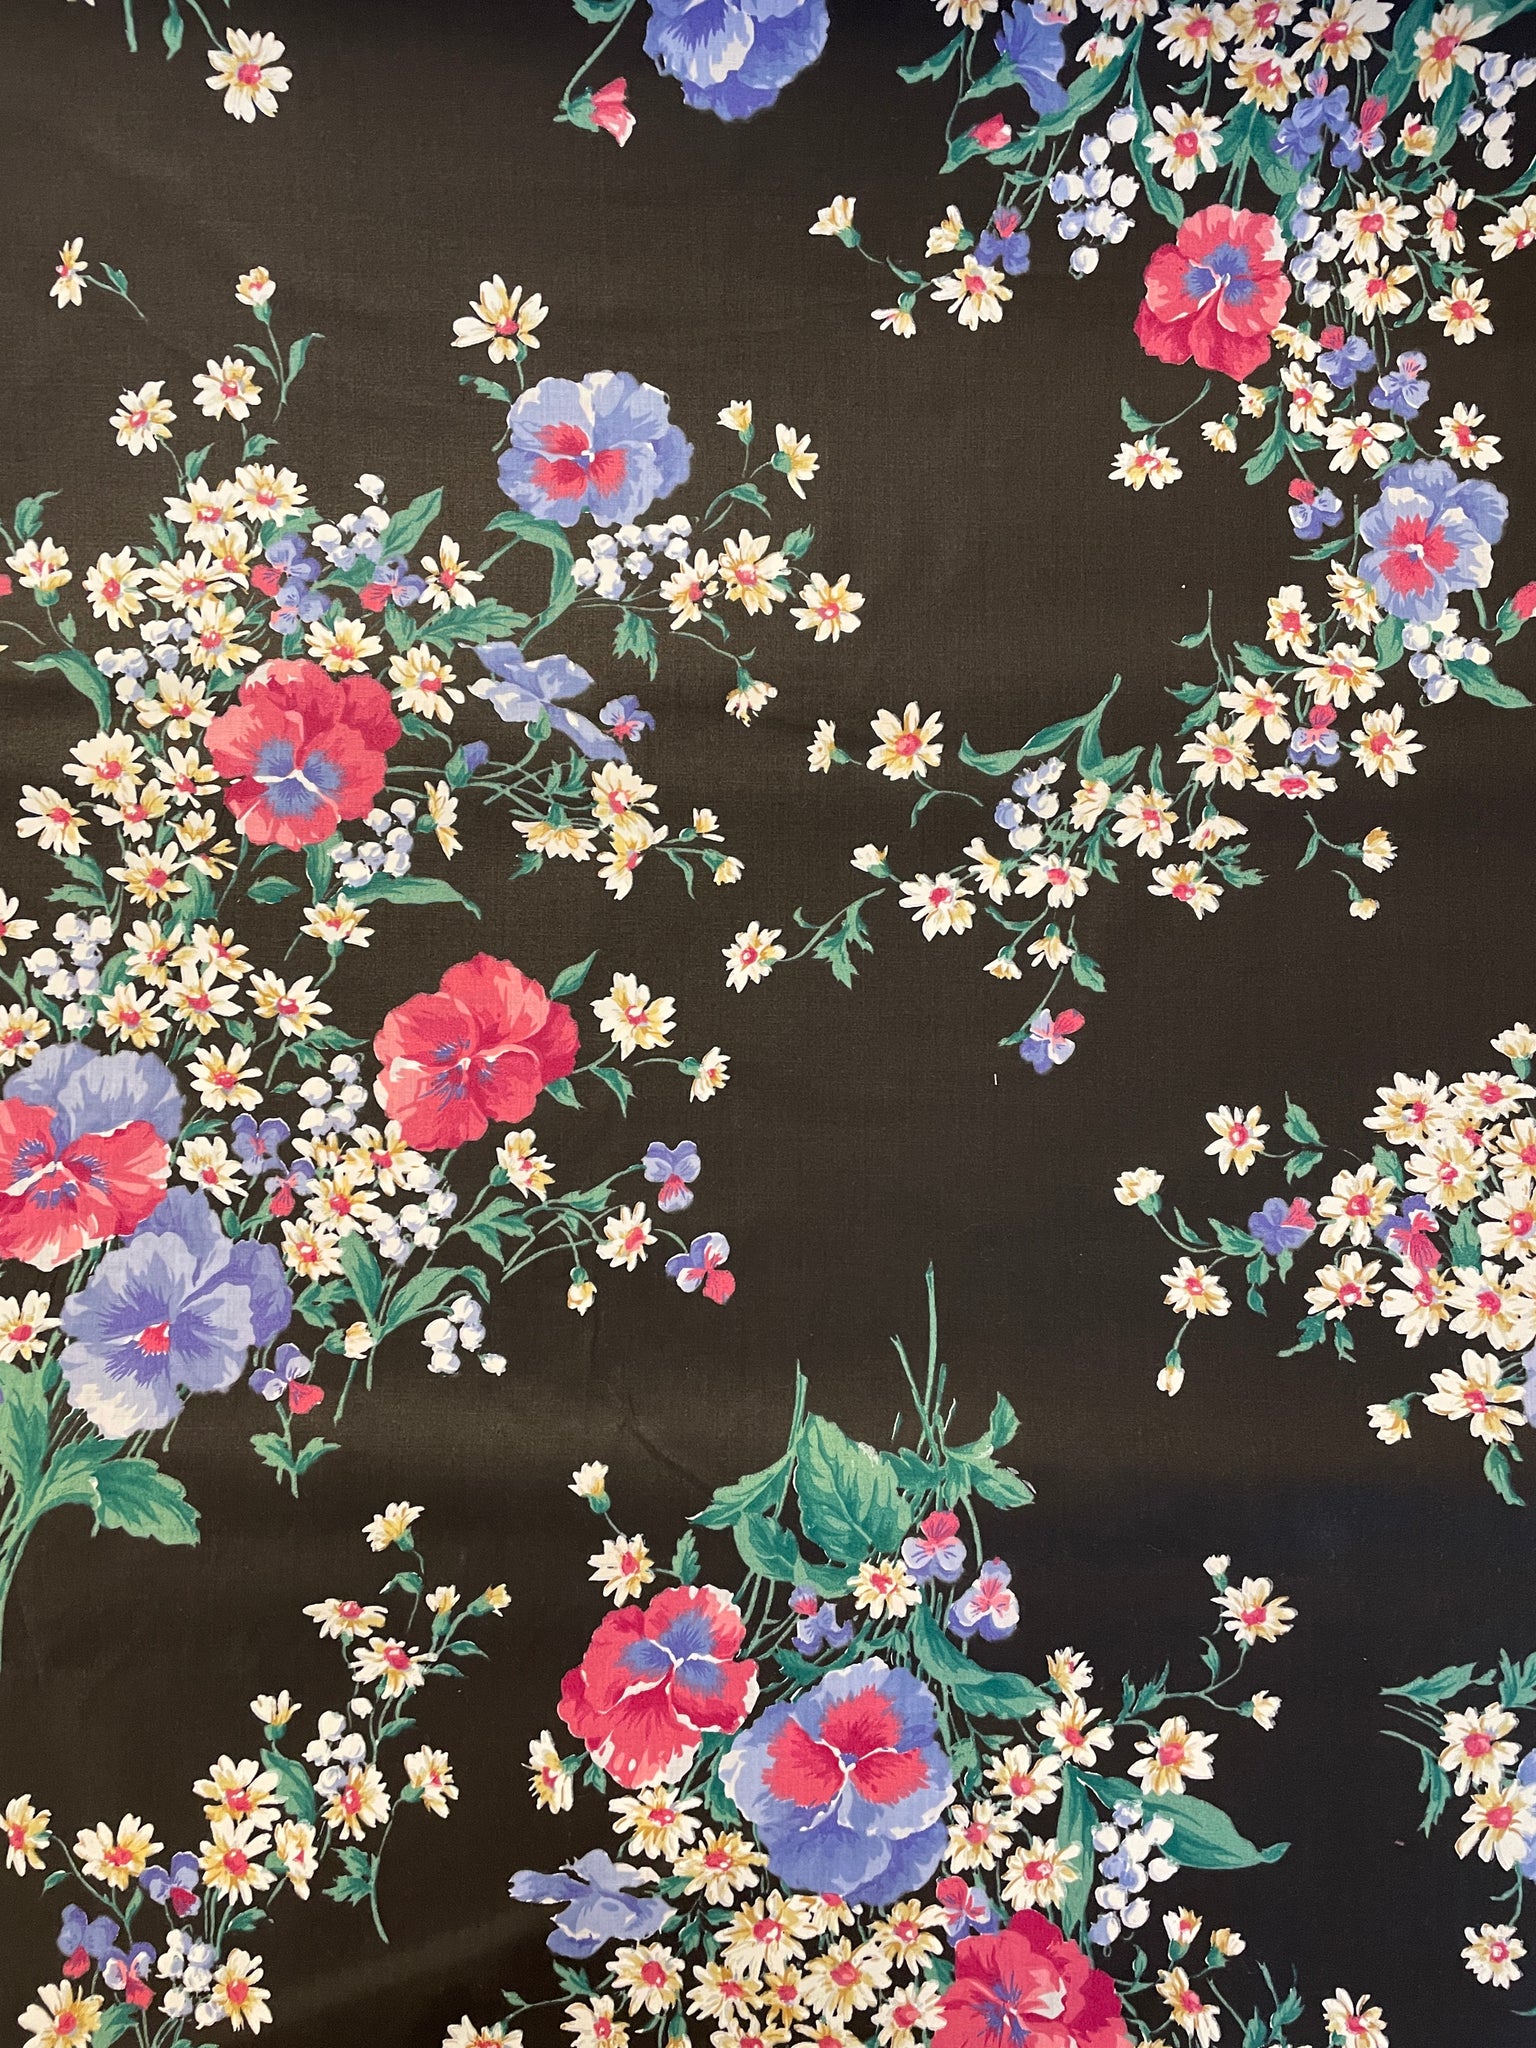 SALE Poly Cotton Vintage - Black with Pansies and Daisies